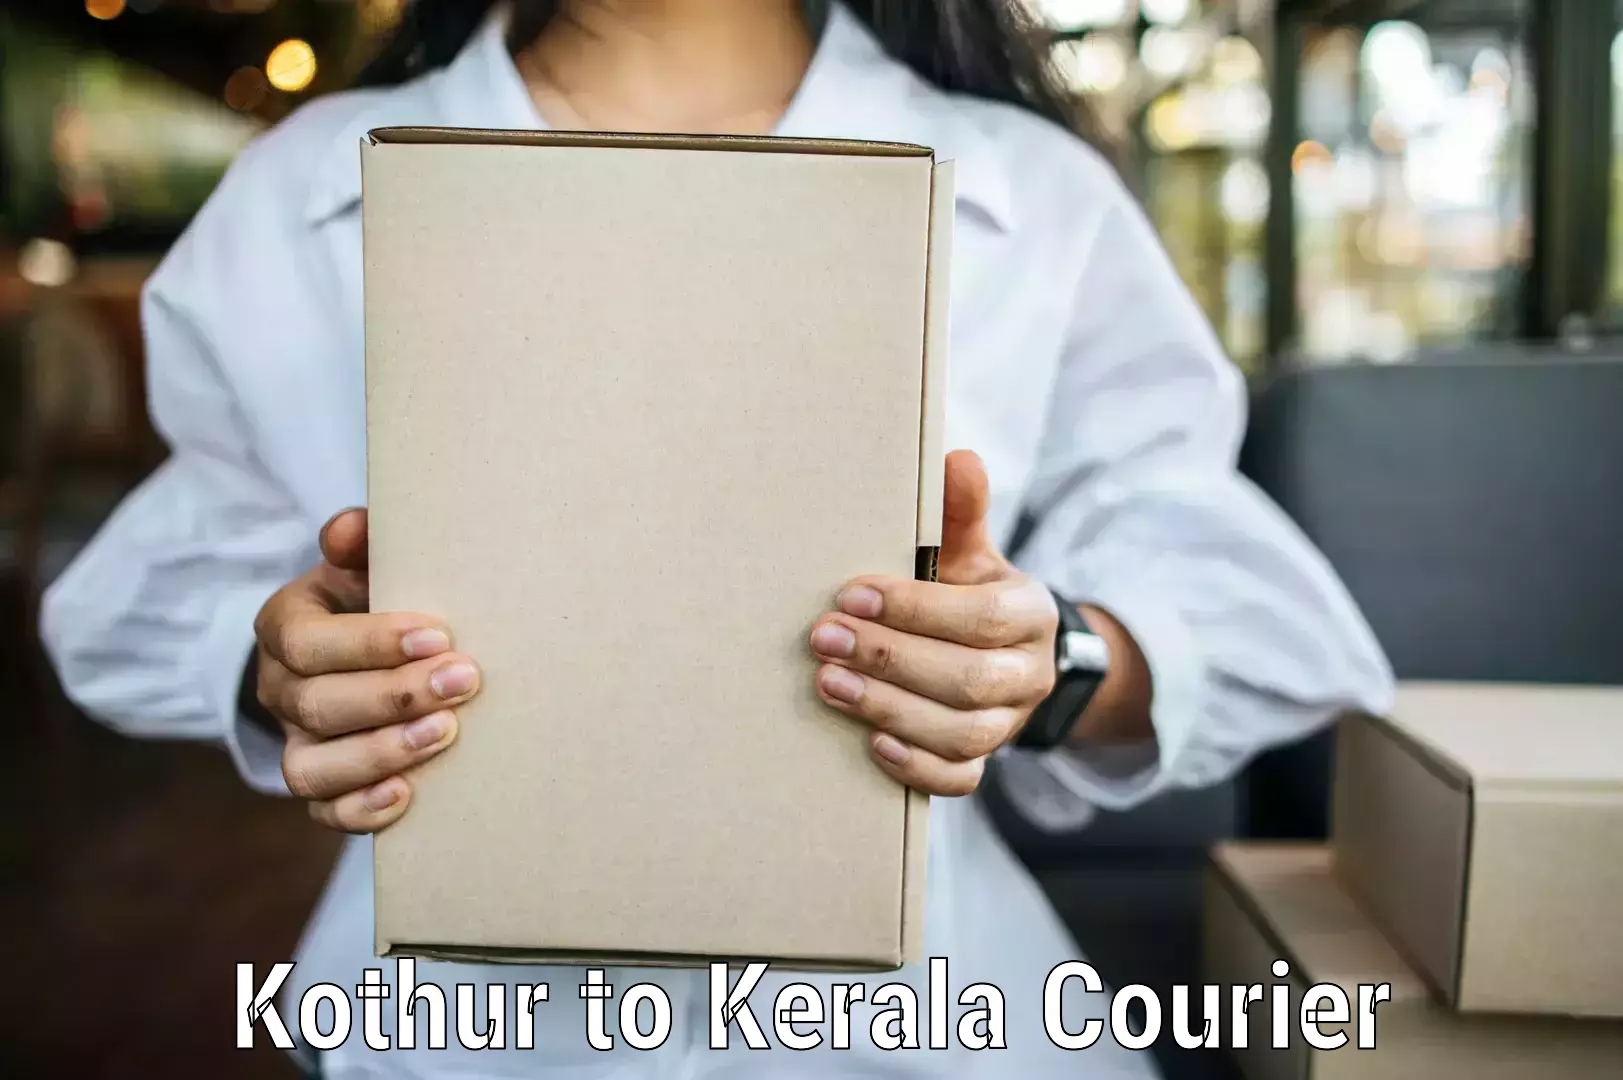 Optimized delivery routes in Kothur to Koyilandy